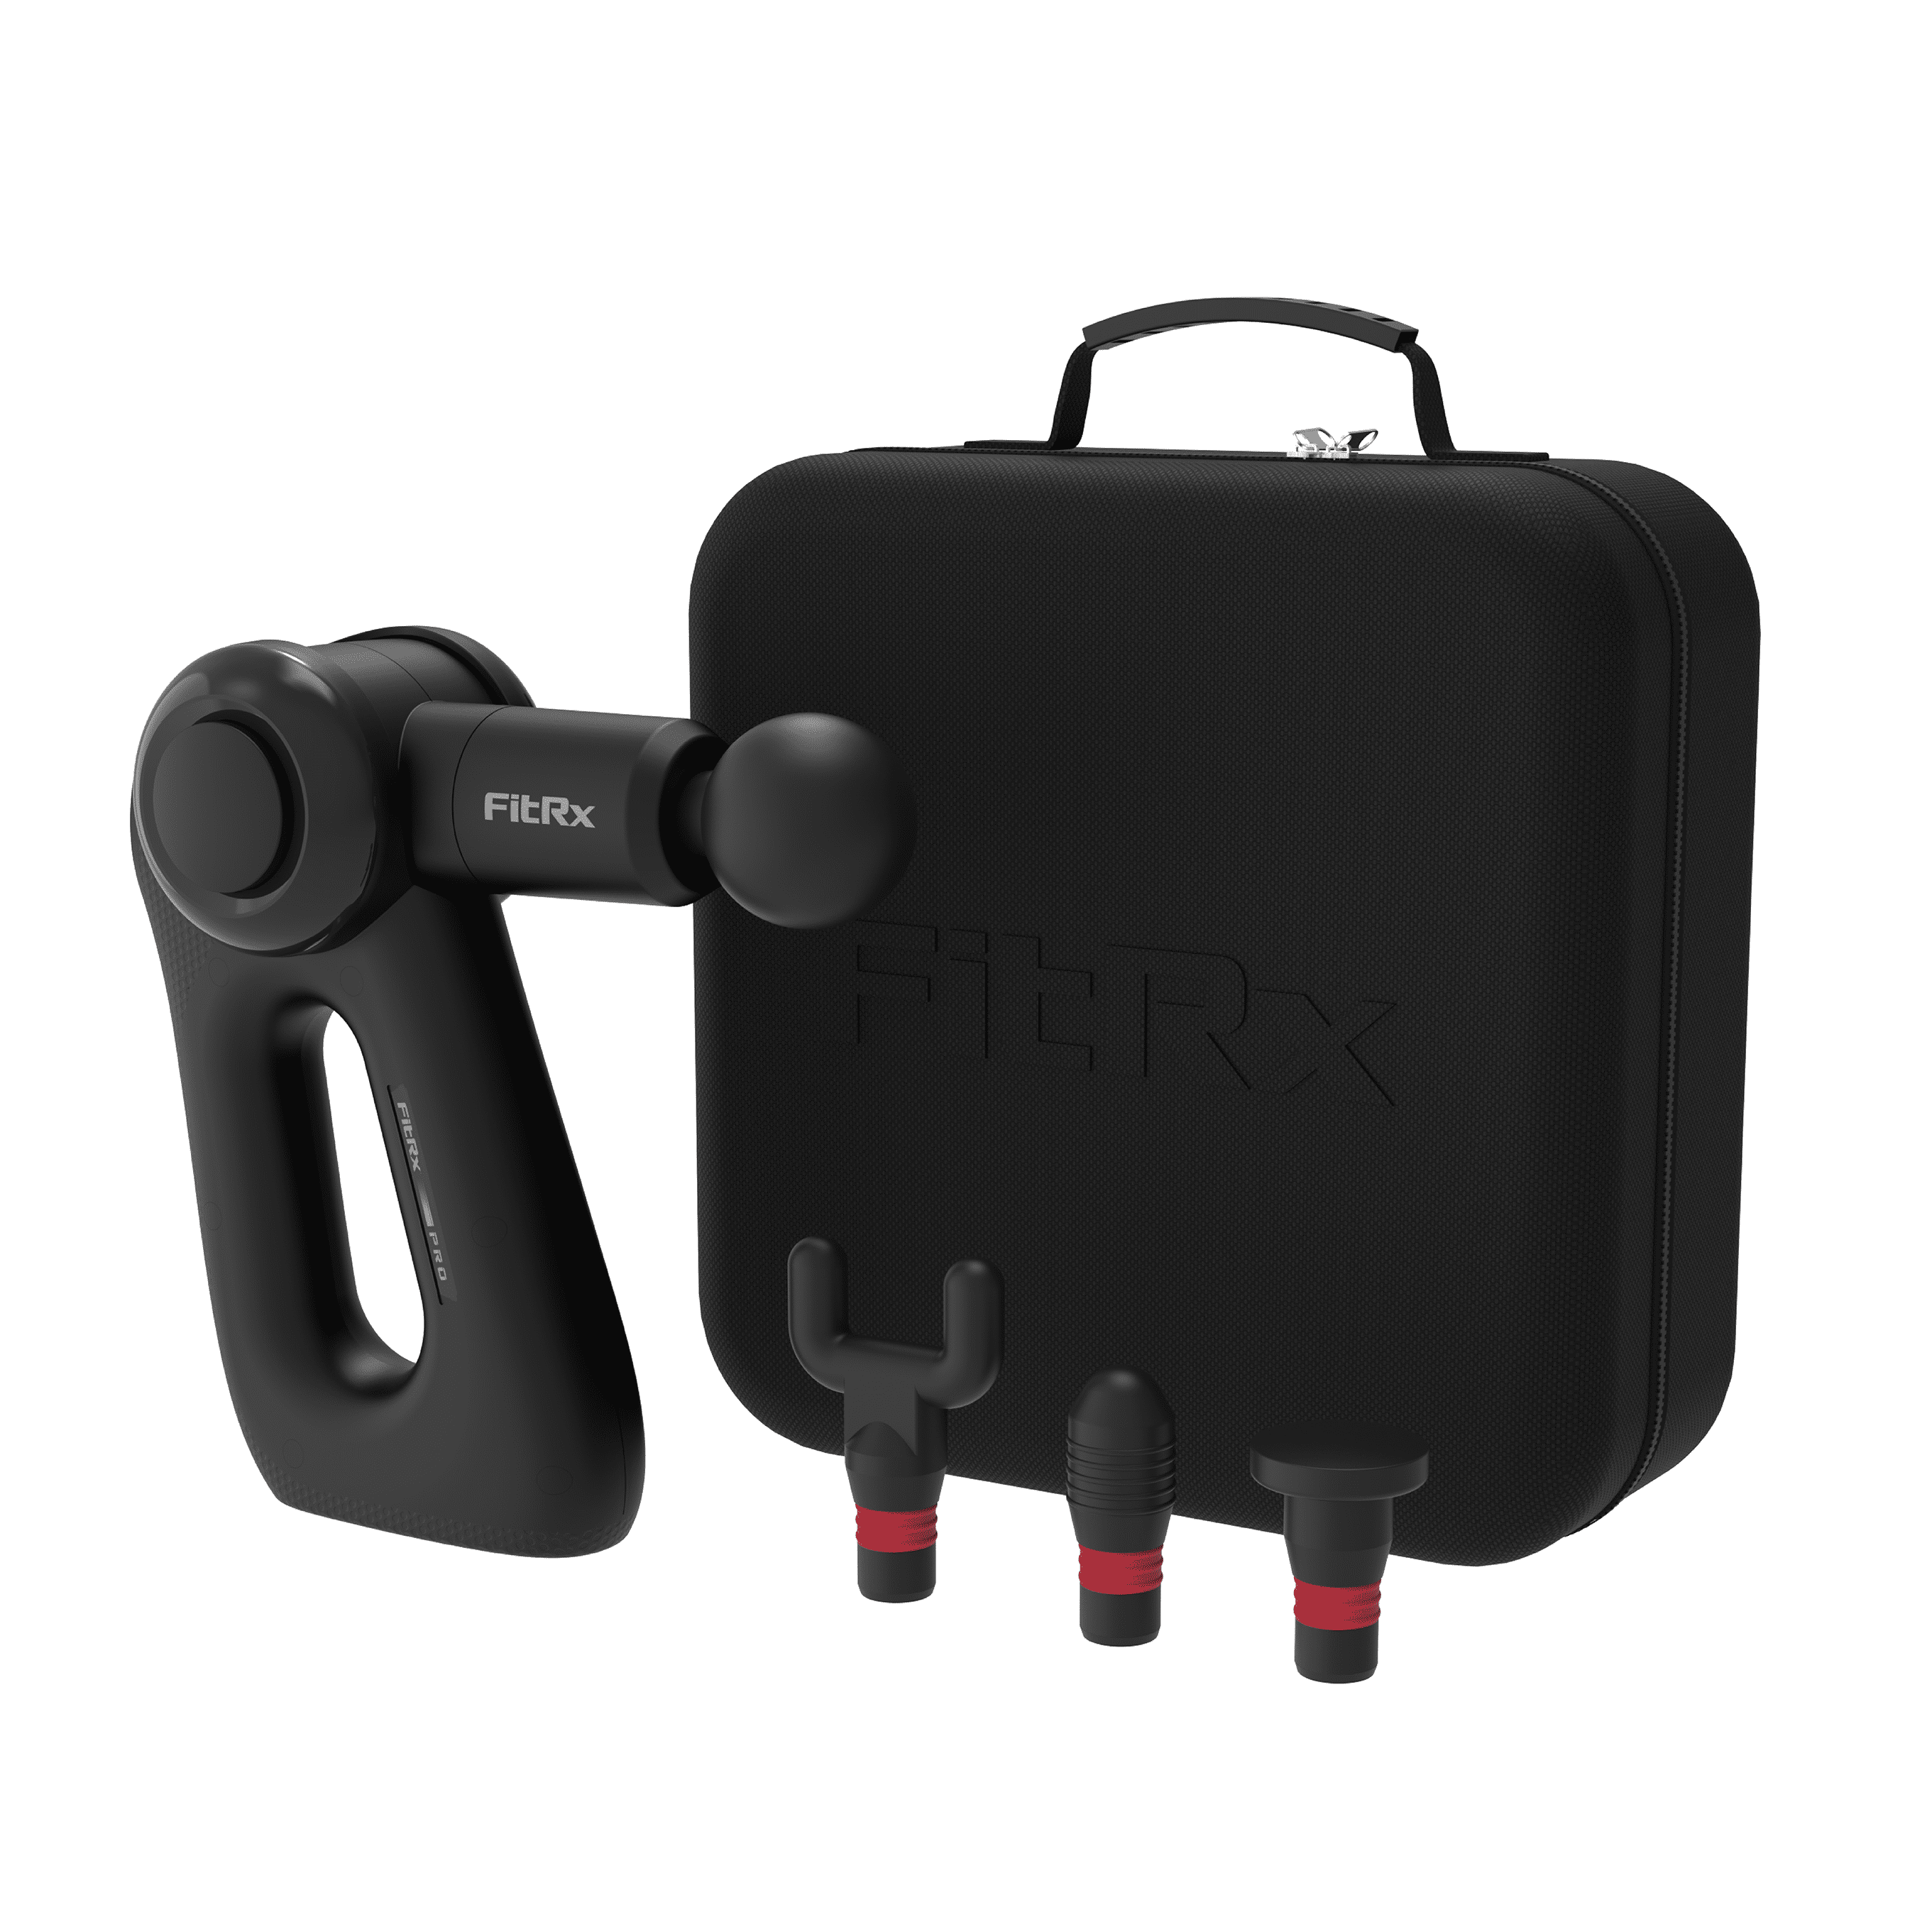 FitRx Muscle Massage Gun, Handheld Percussion Massager with Speeds and Attachments for Neck and Back - Walmart.com